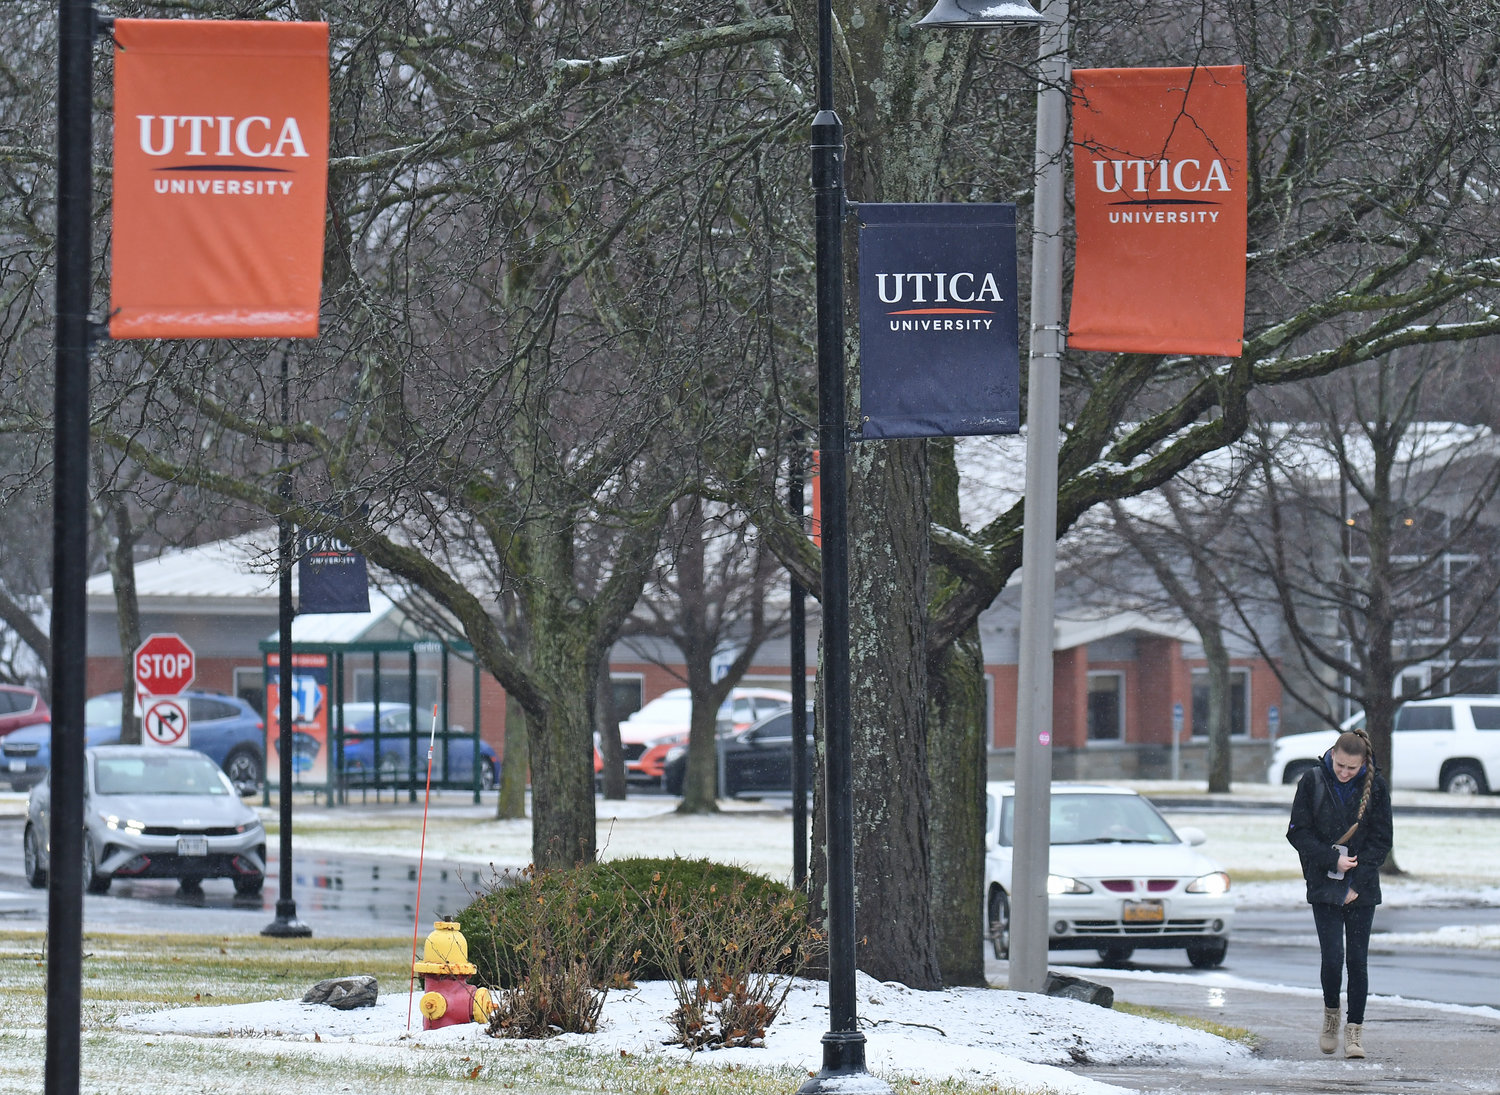 Utica University banners are seen on campus Friday, Jan. 20 while a student walks along the sidewalk in Utica.